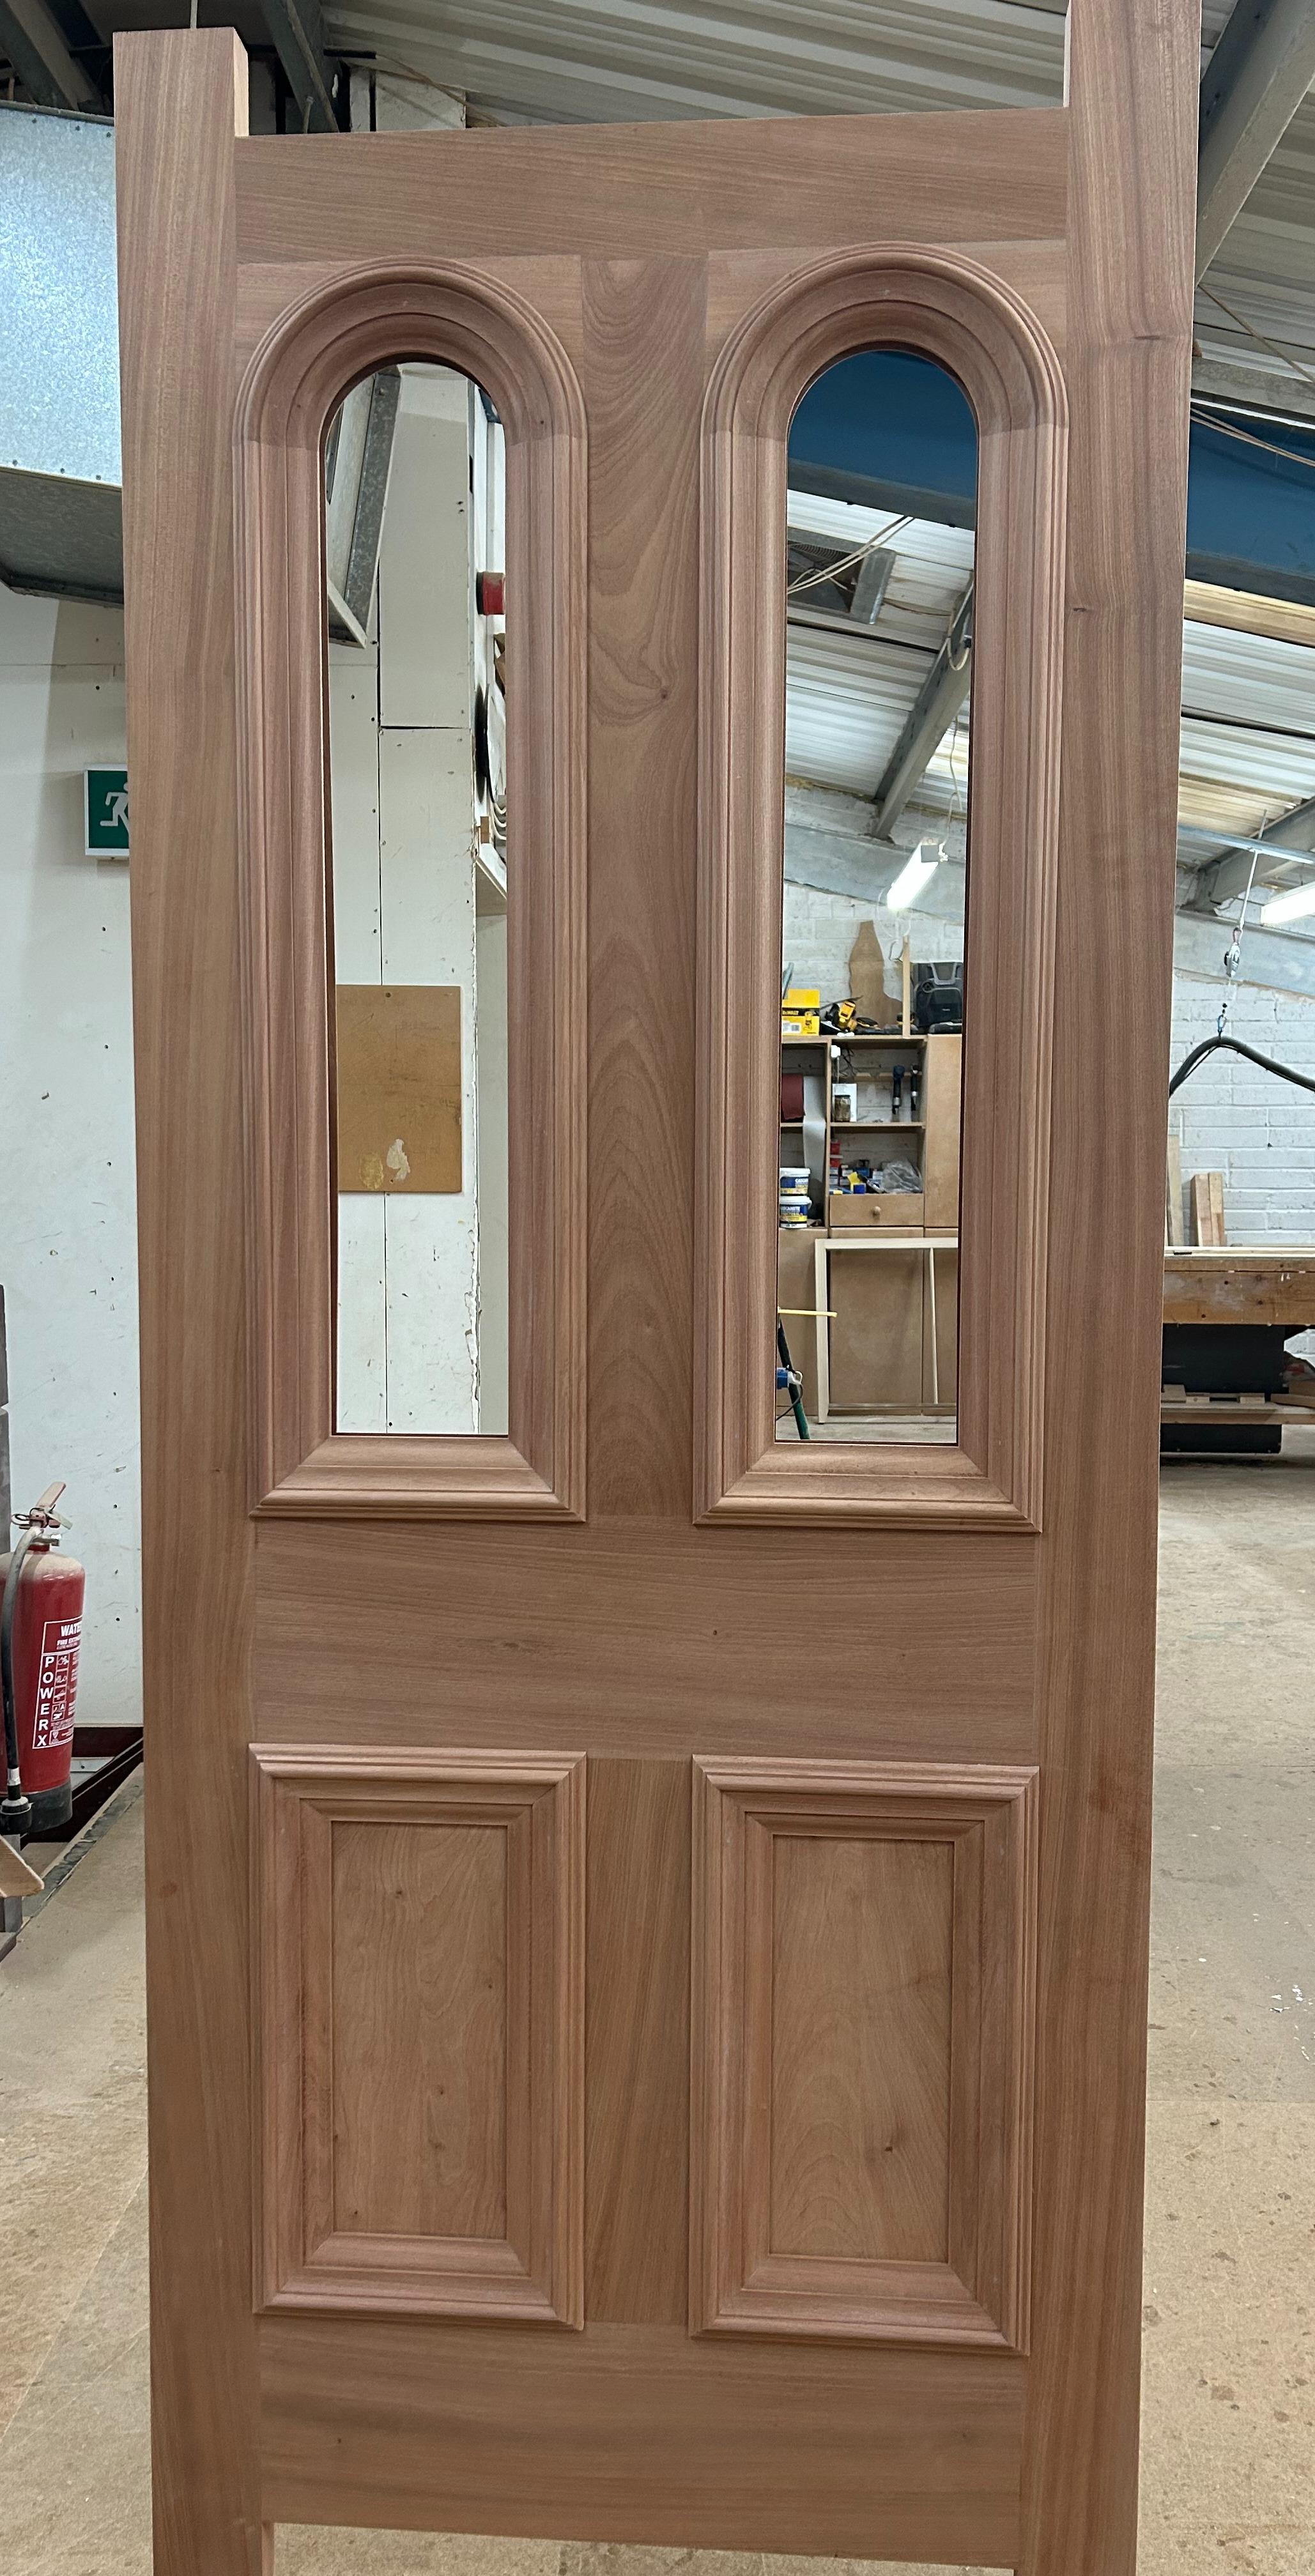 This sapele door had to be an exact replica of the old one - curve work on our CNC machine is easy